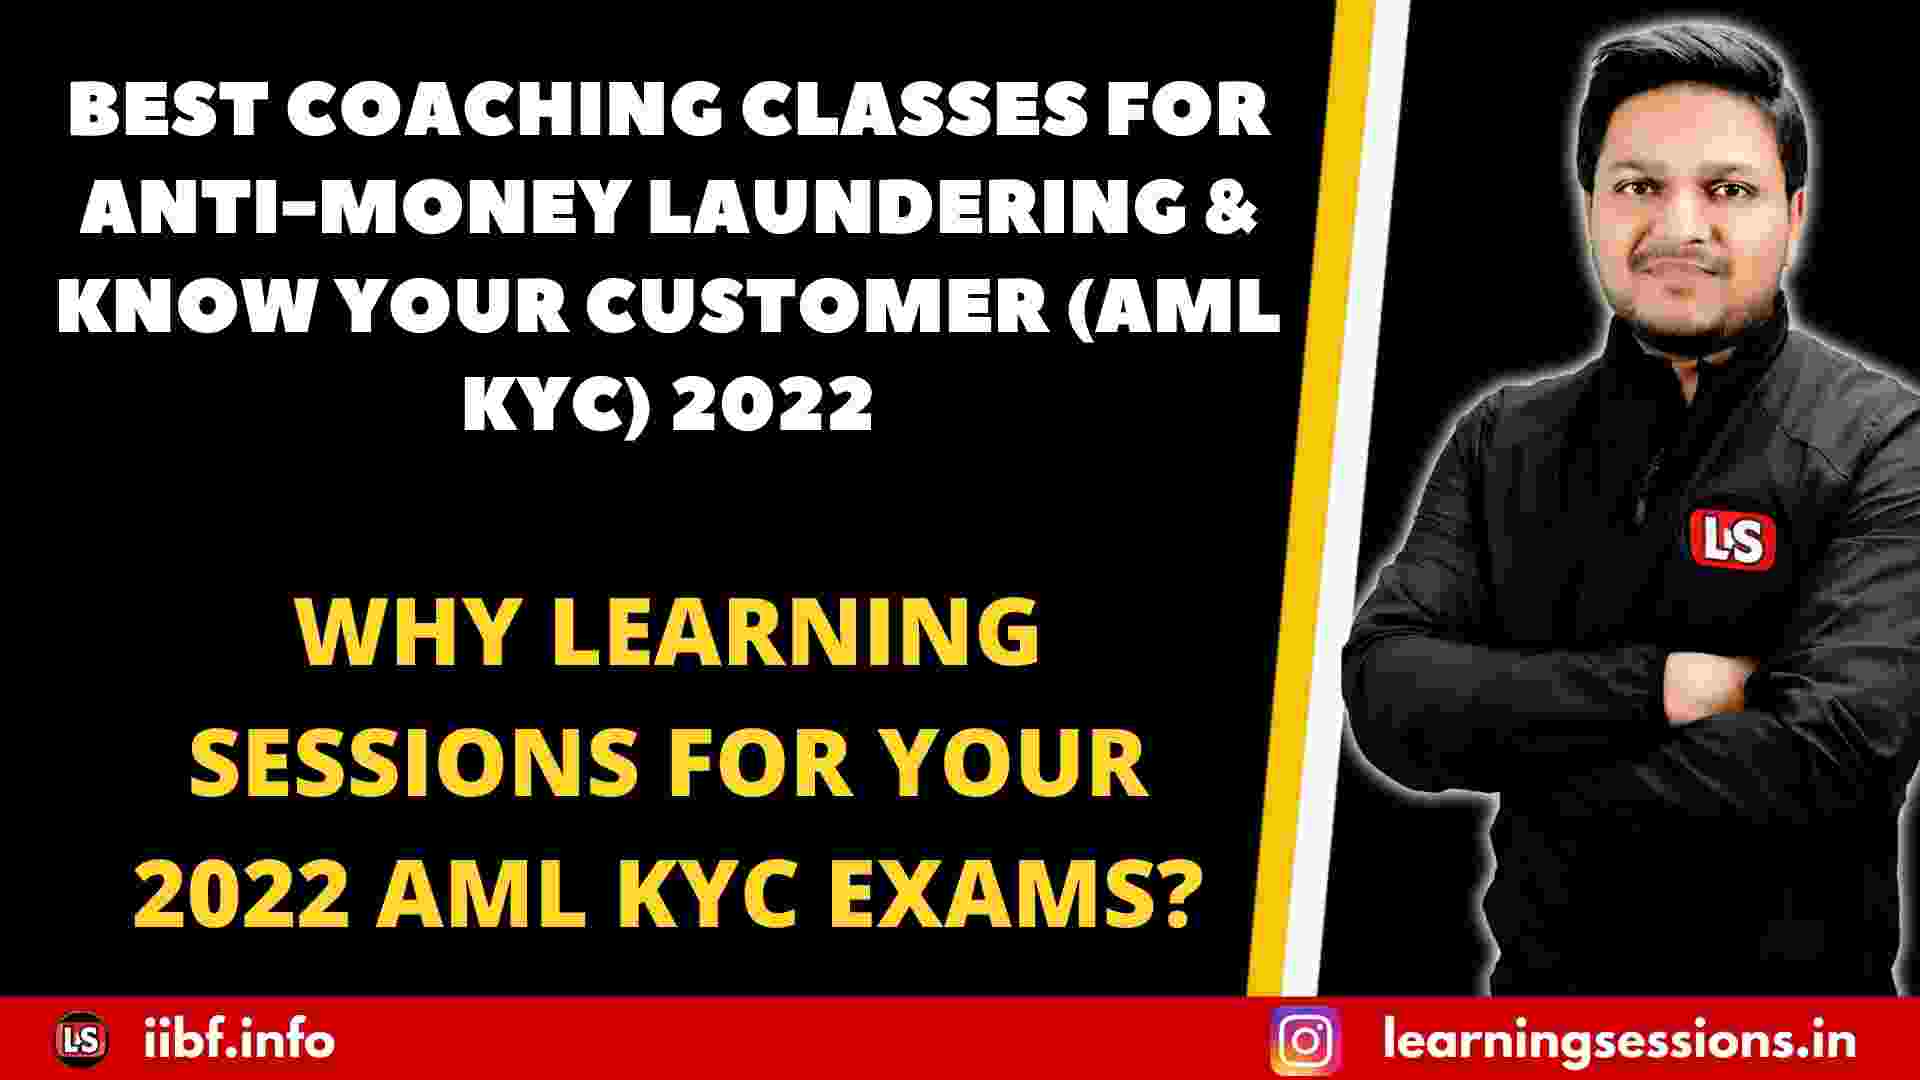 BEST COACHING CLASSES FOR ANTI-MONEY LAUNDERING & KNOW YOUR CUSTOMER 2022 | WHY LEARNING SESSIONS FOR YOUR 2022 AML KYC EXAMS?